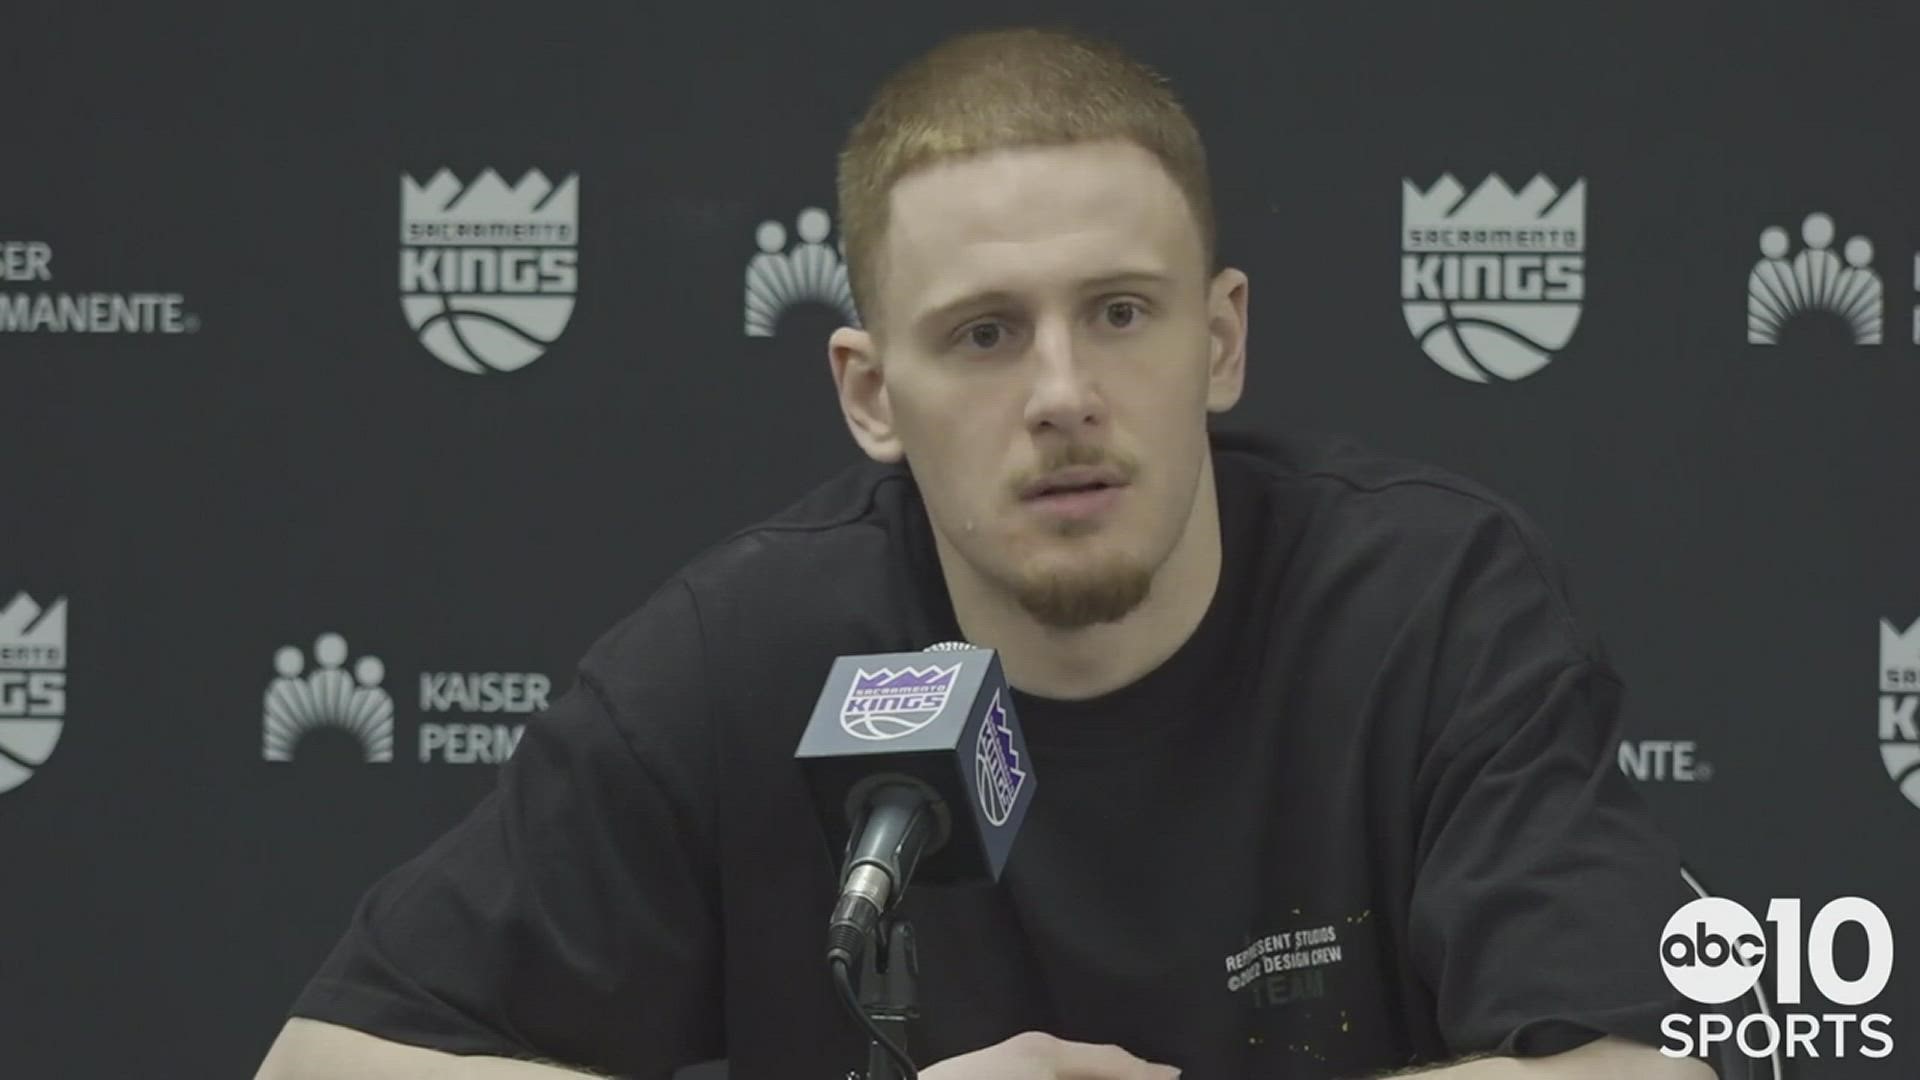 Donte DiVincenzo details his winding path from Bucks to Kings to